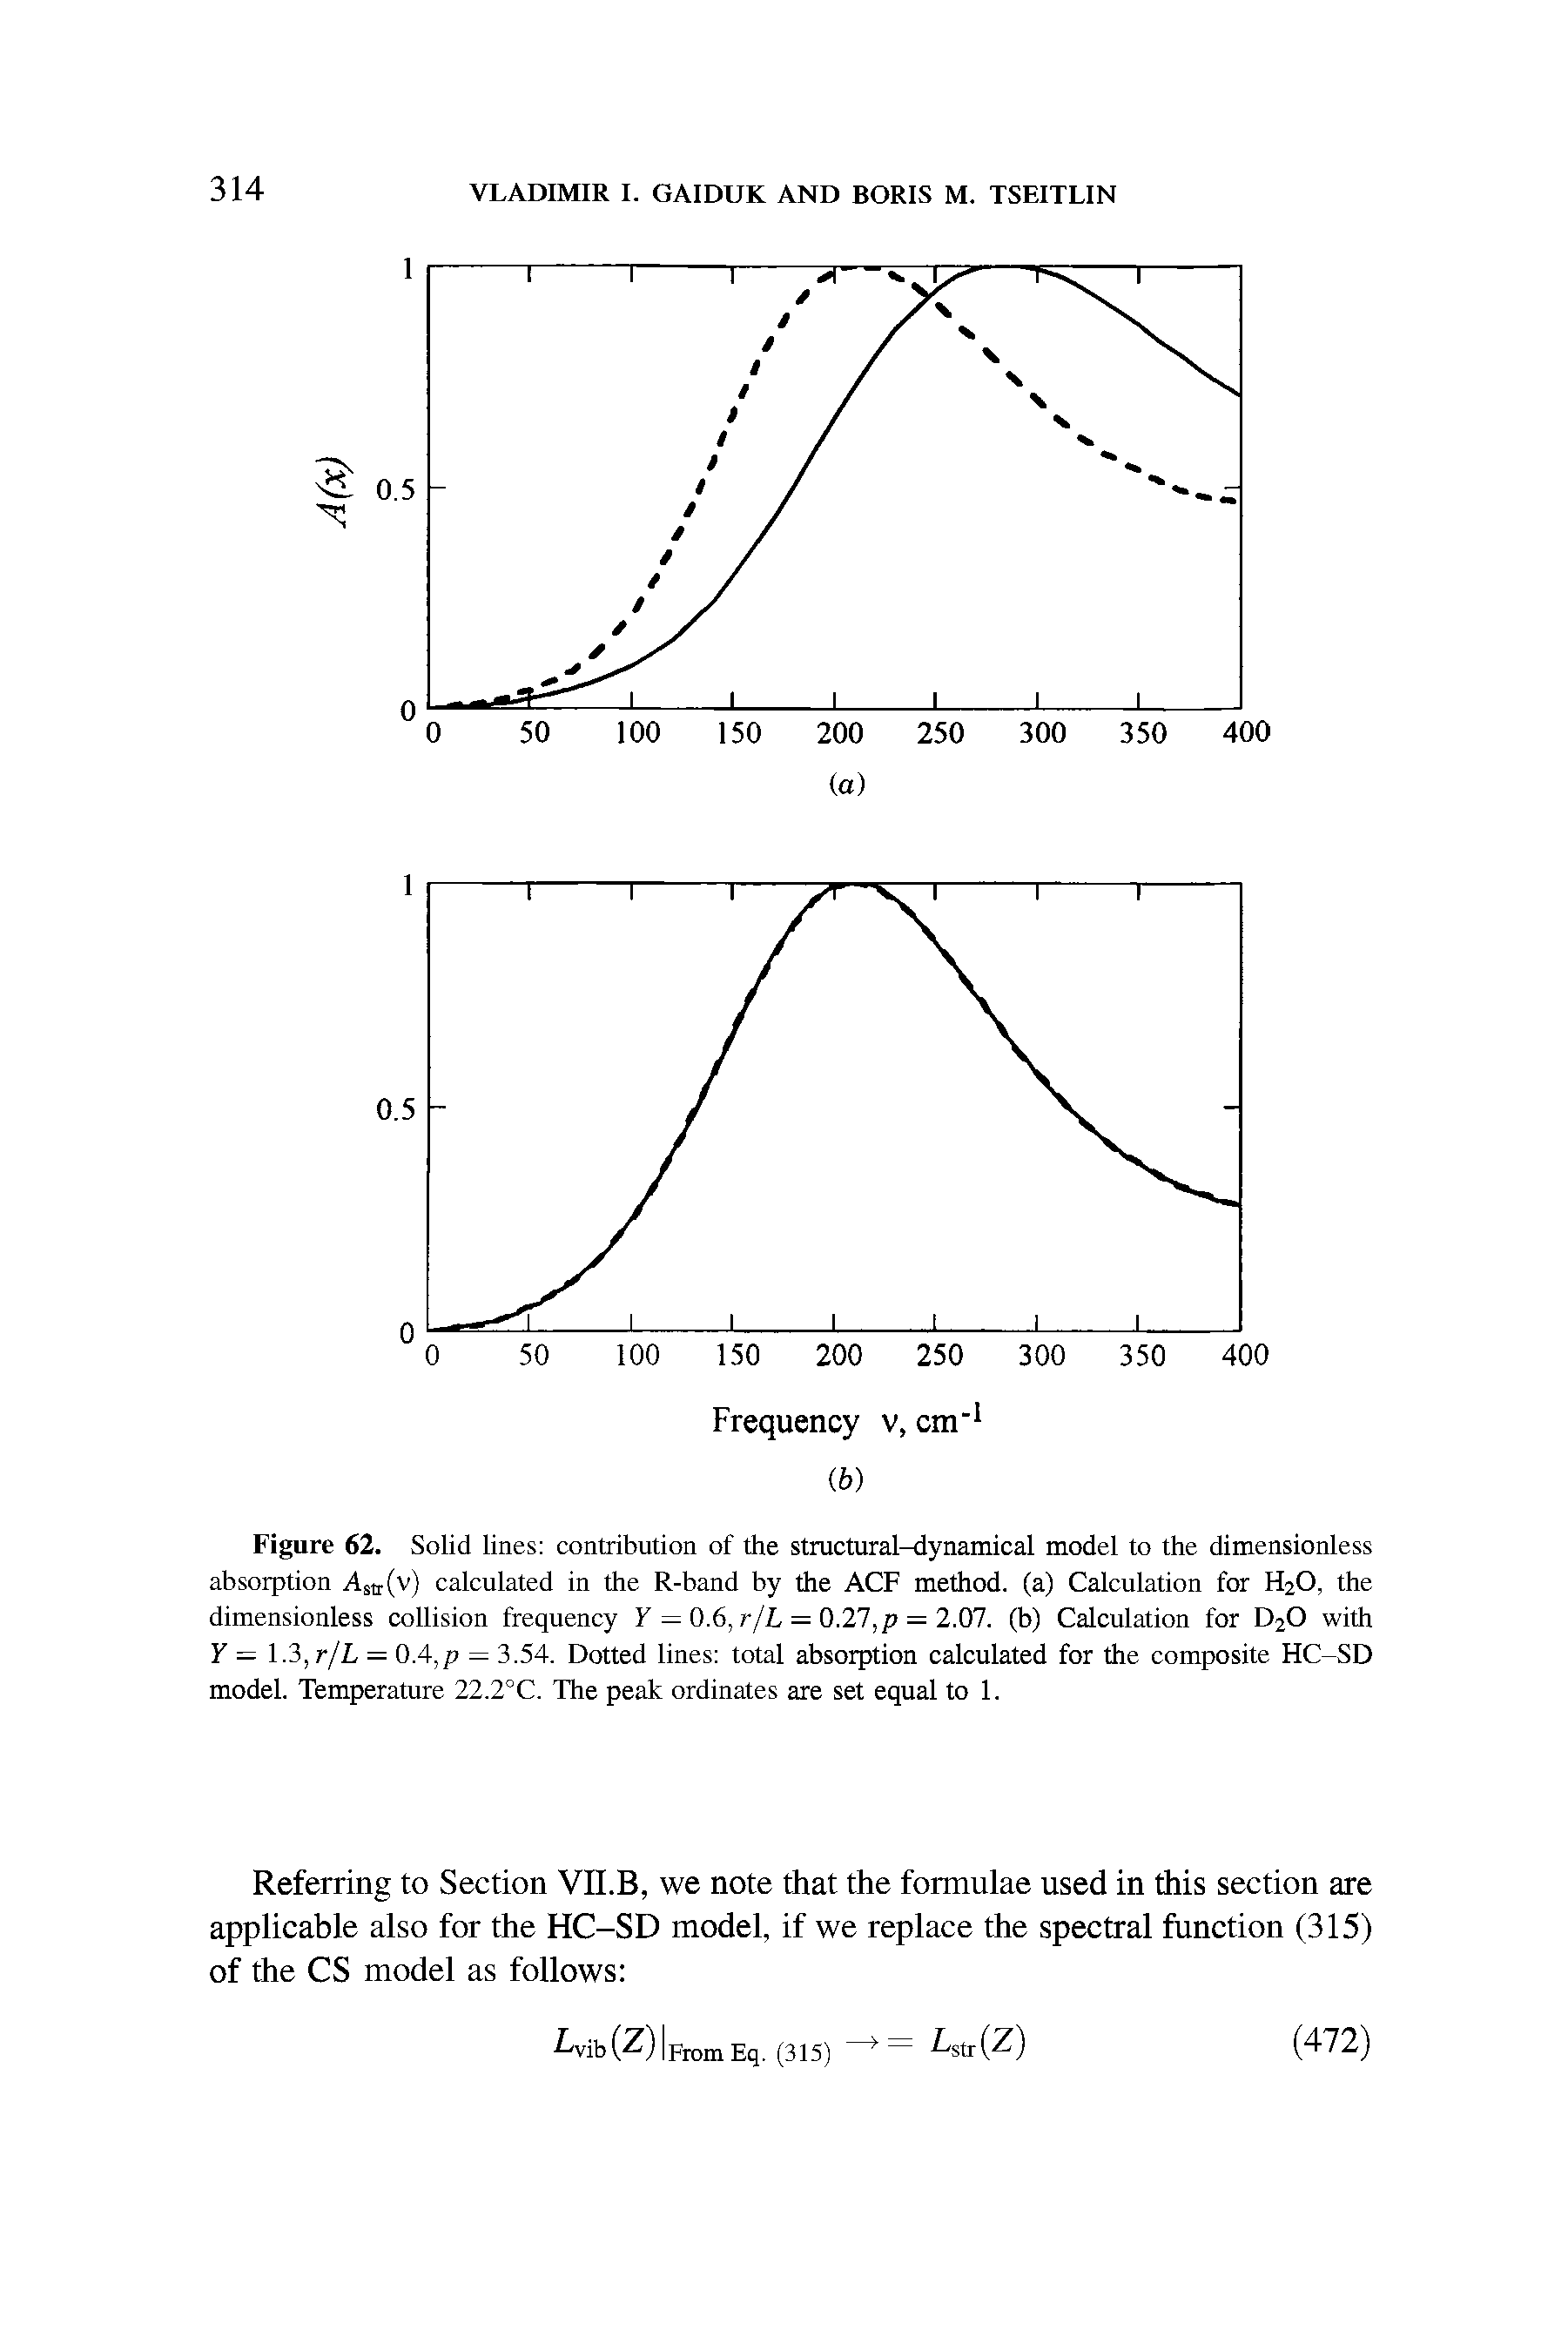 Figure 62. Solid lines contribution of the structural-dynamical model to the dimensionless absorption Astr(v) calculated in the R-band by the ACF method, (a) Calculation for H20, the dimensionless collision frequency Y = 0.6, r/L = 0.27,/) = 2.07. (b) Calculation for D20 with Y = 1.3, r/L = 0.4,/j = 3.54. Dotted lines total absorption calculated for the composite HC-SD model. Temperature 22.2°C. The peak ordinates are set equal to 1.